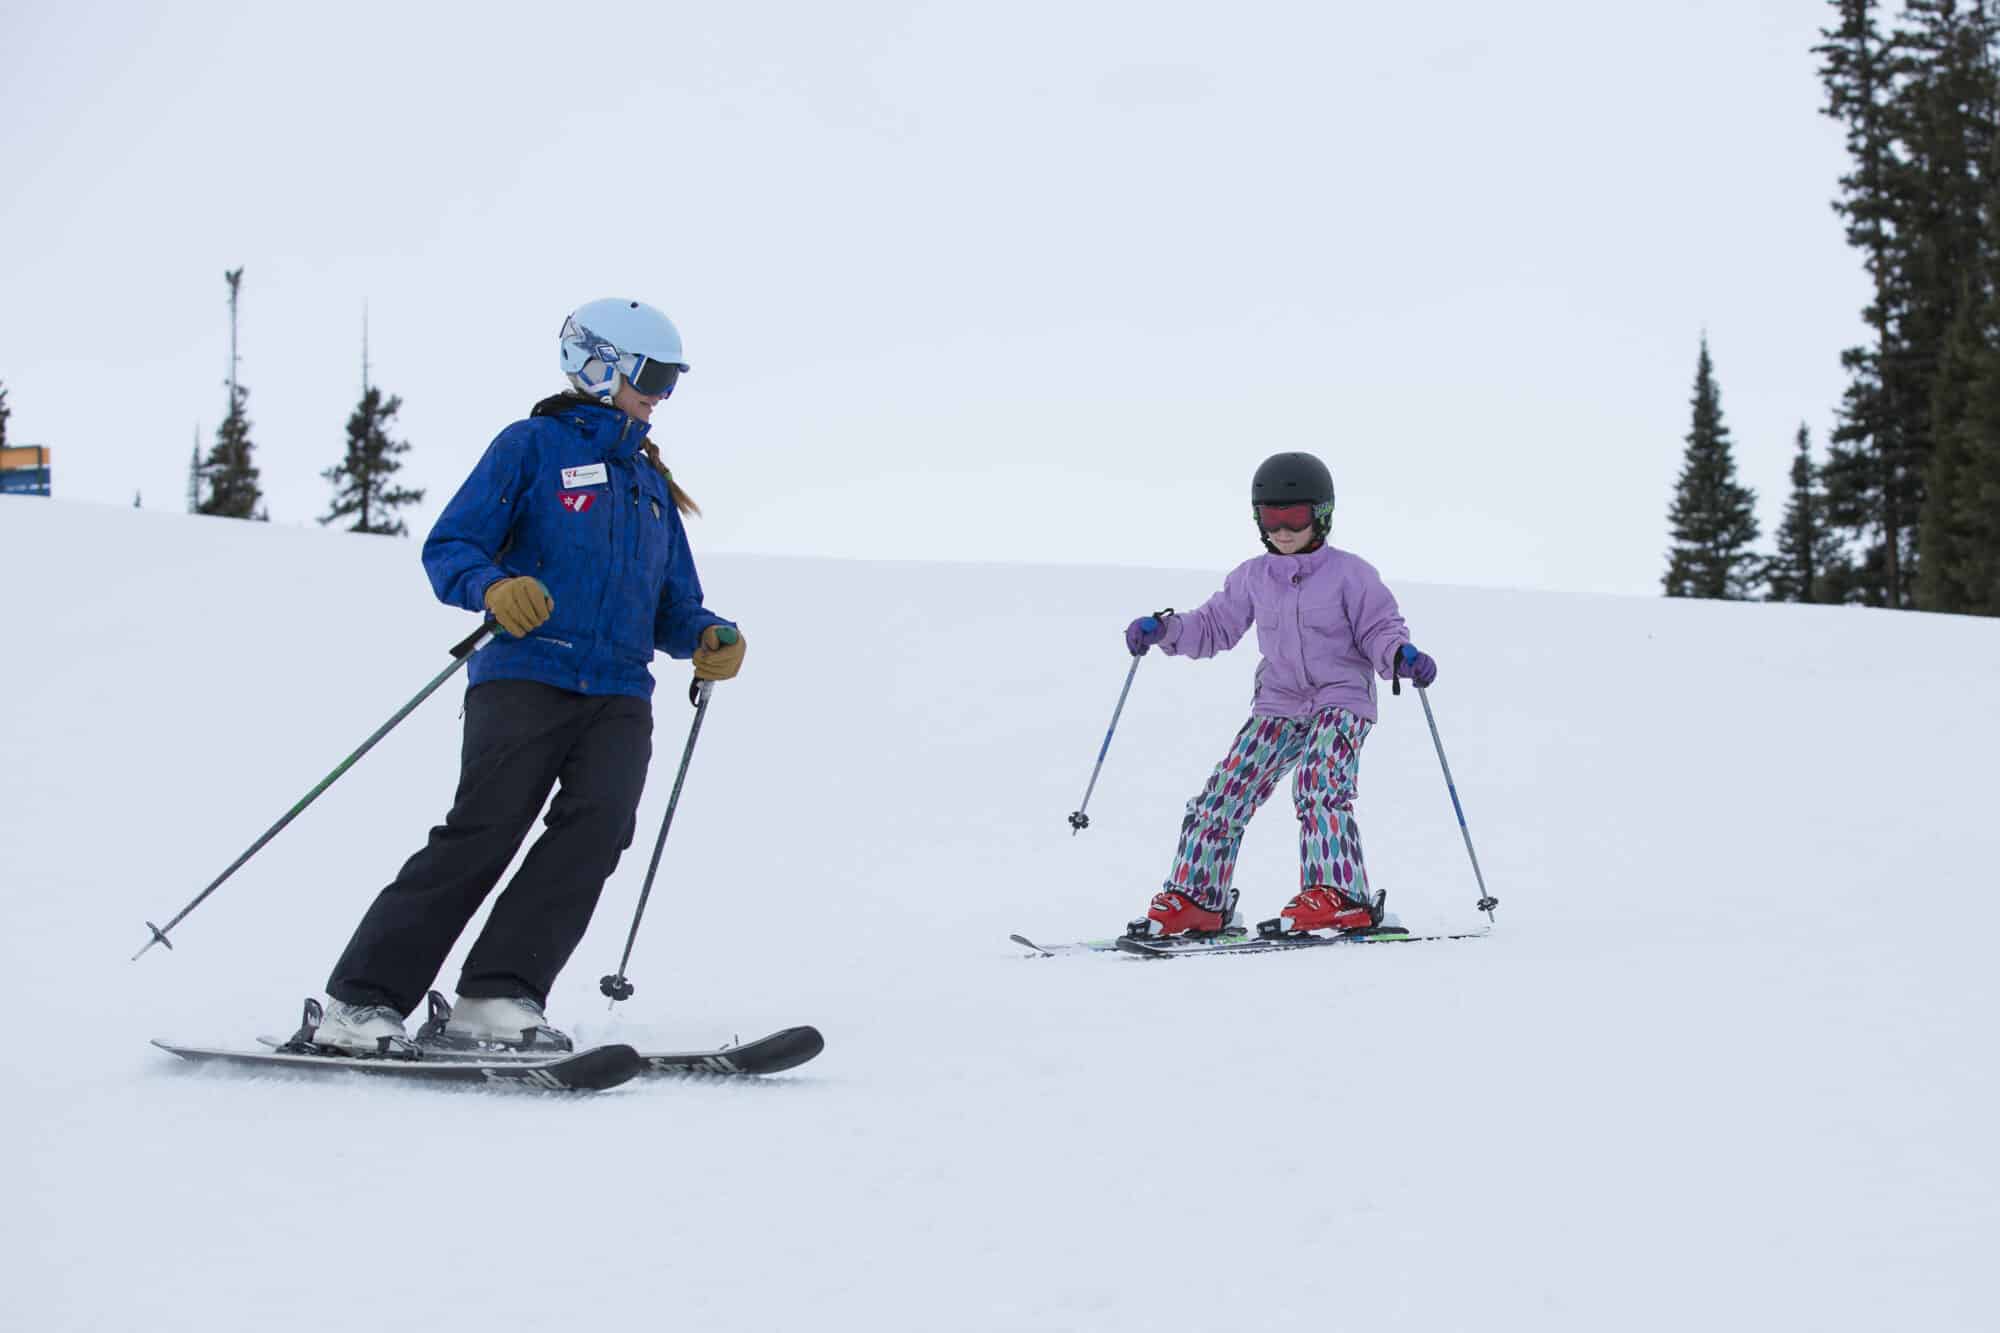 Ski school instructor teaches how to switch edges on skis